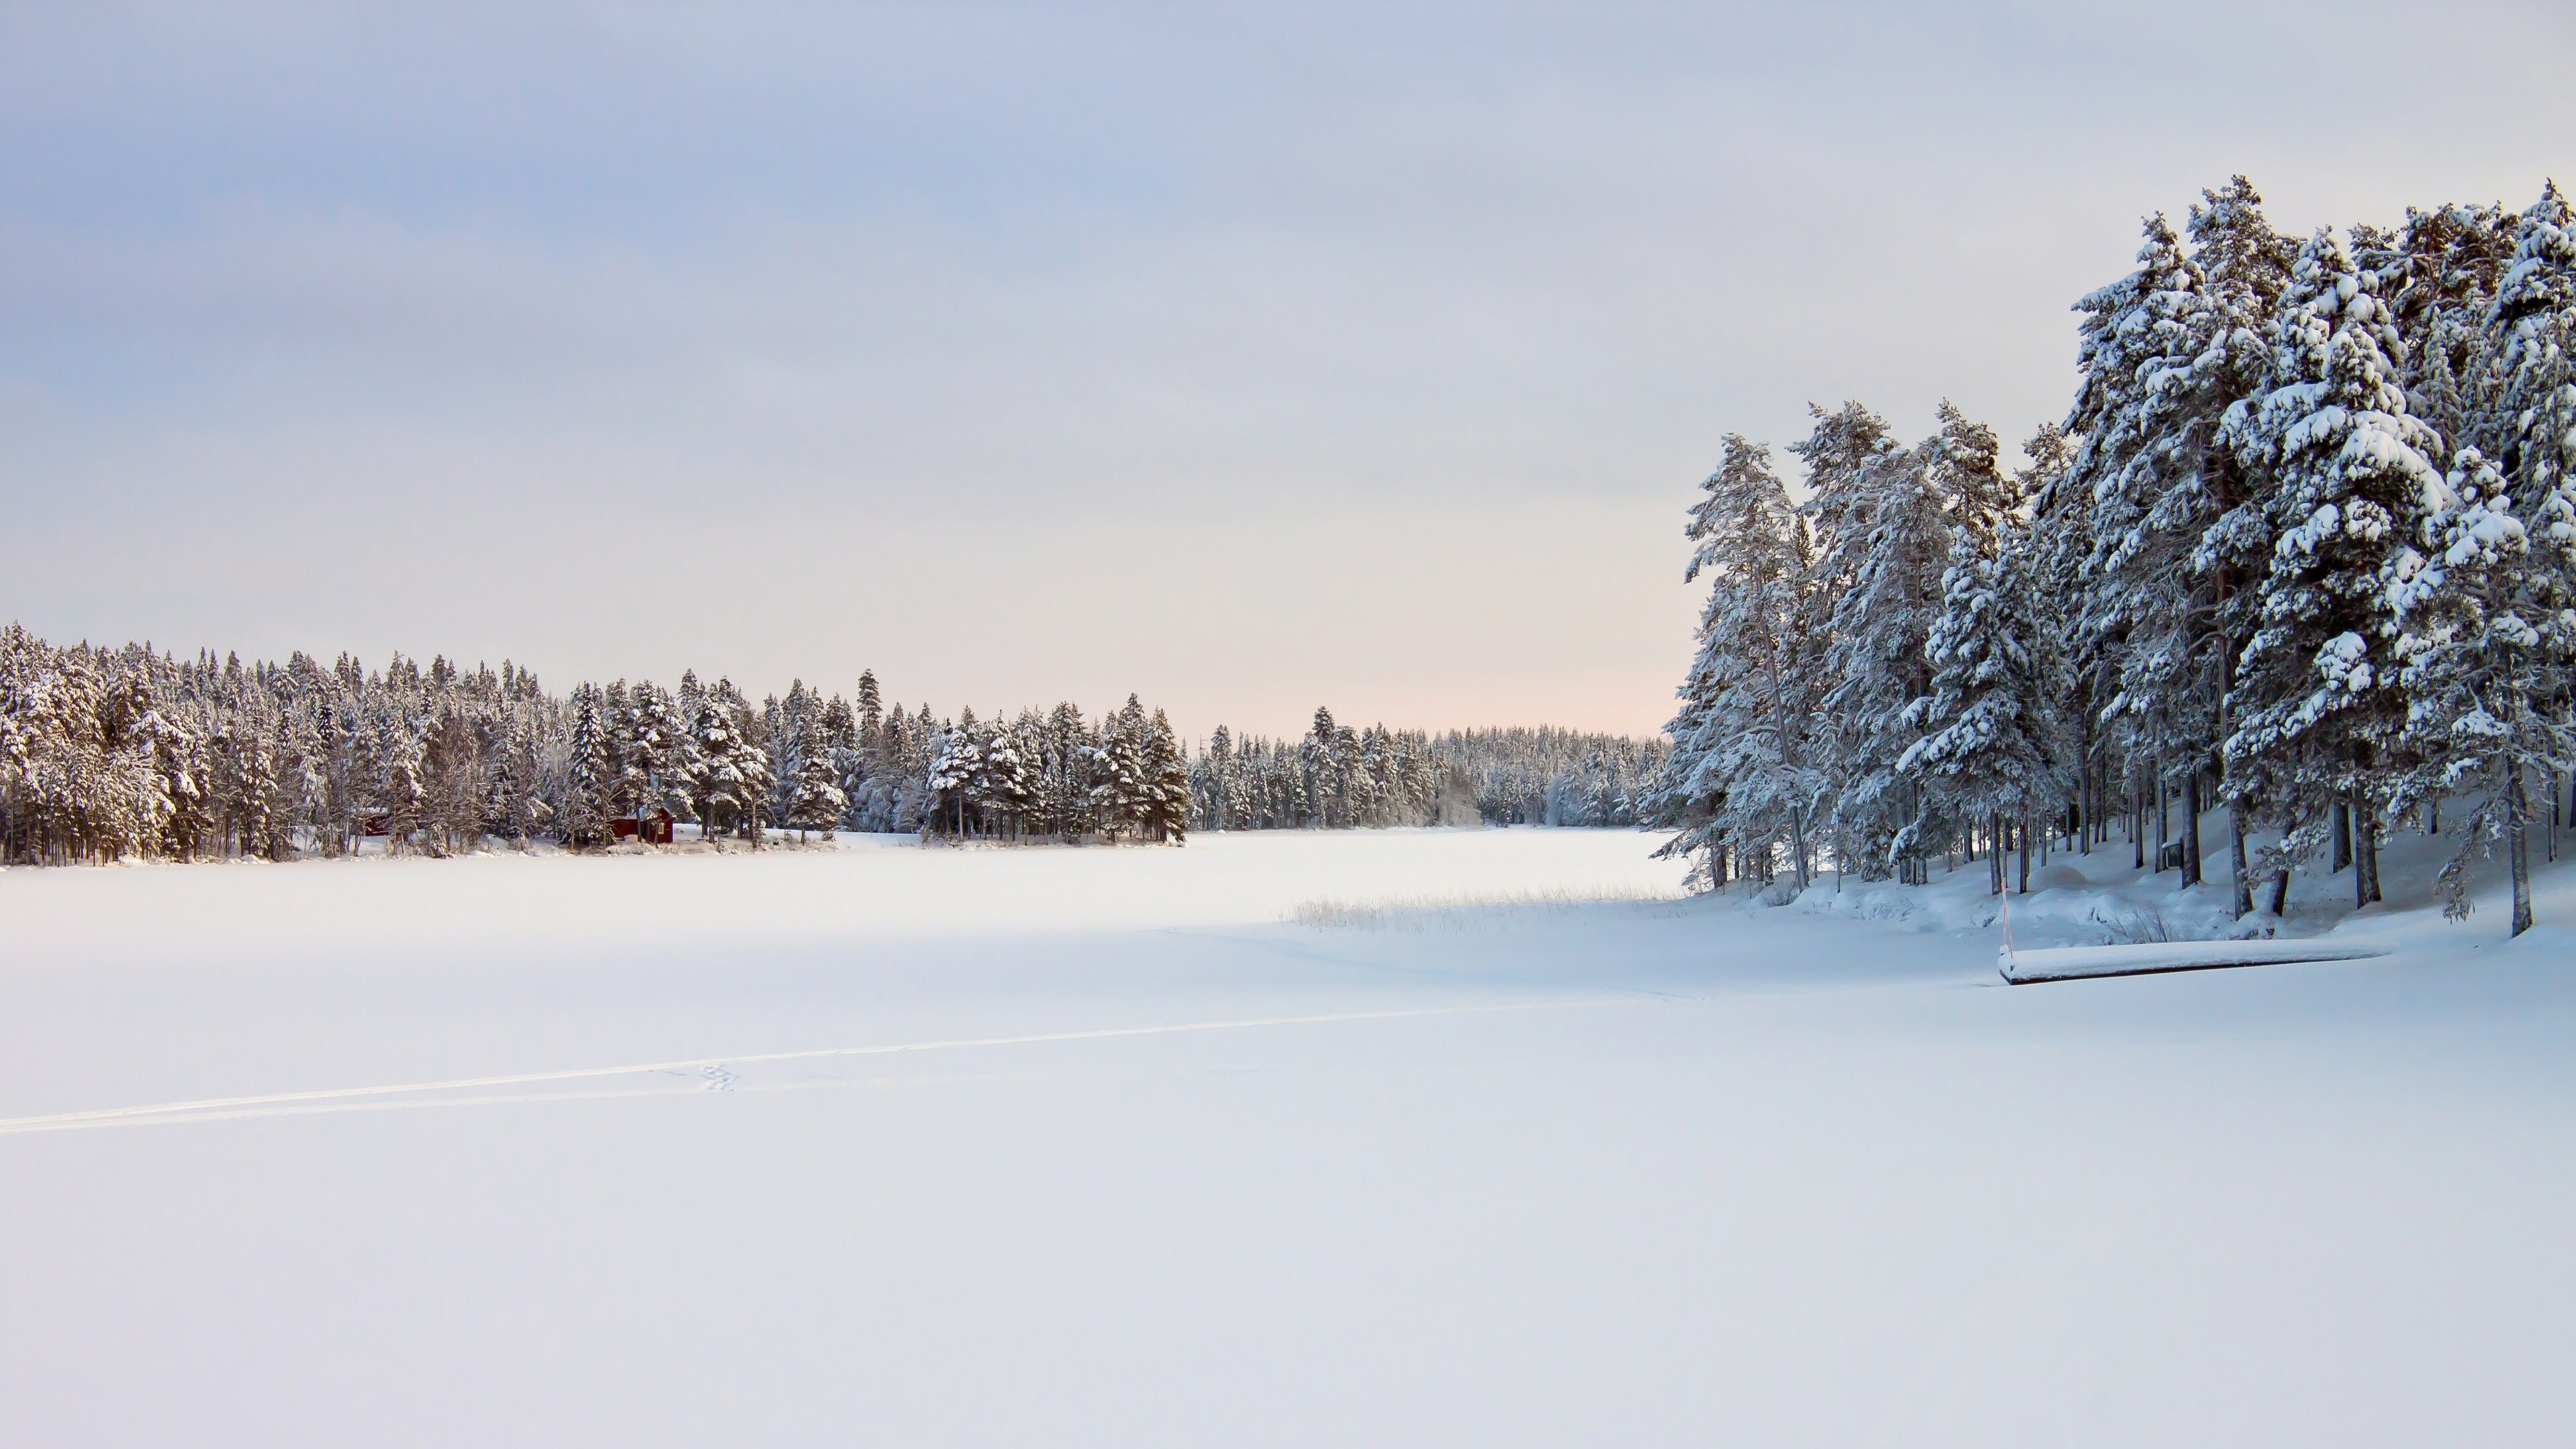 Winter: The coldest season, Snowfield, A permanent wide expanse of snow. 3840x2160 4K Wallpaper.